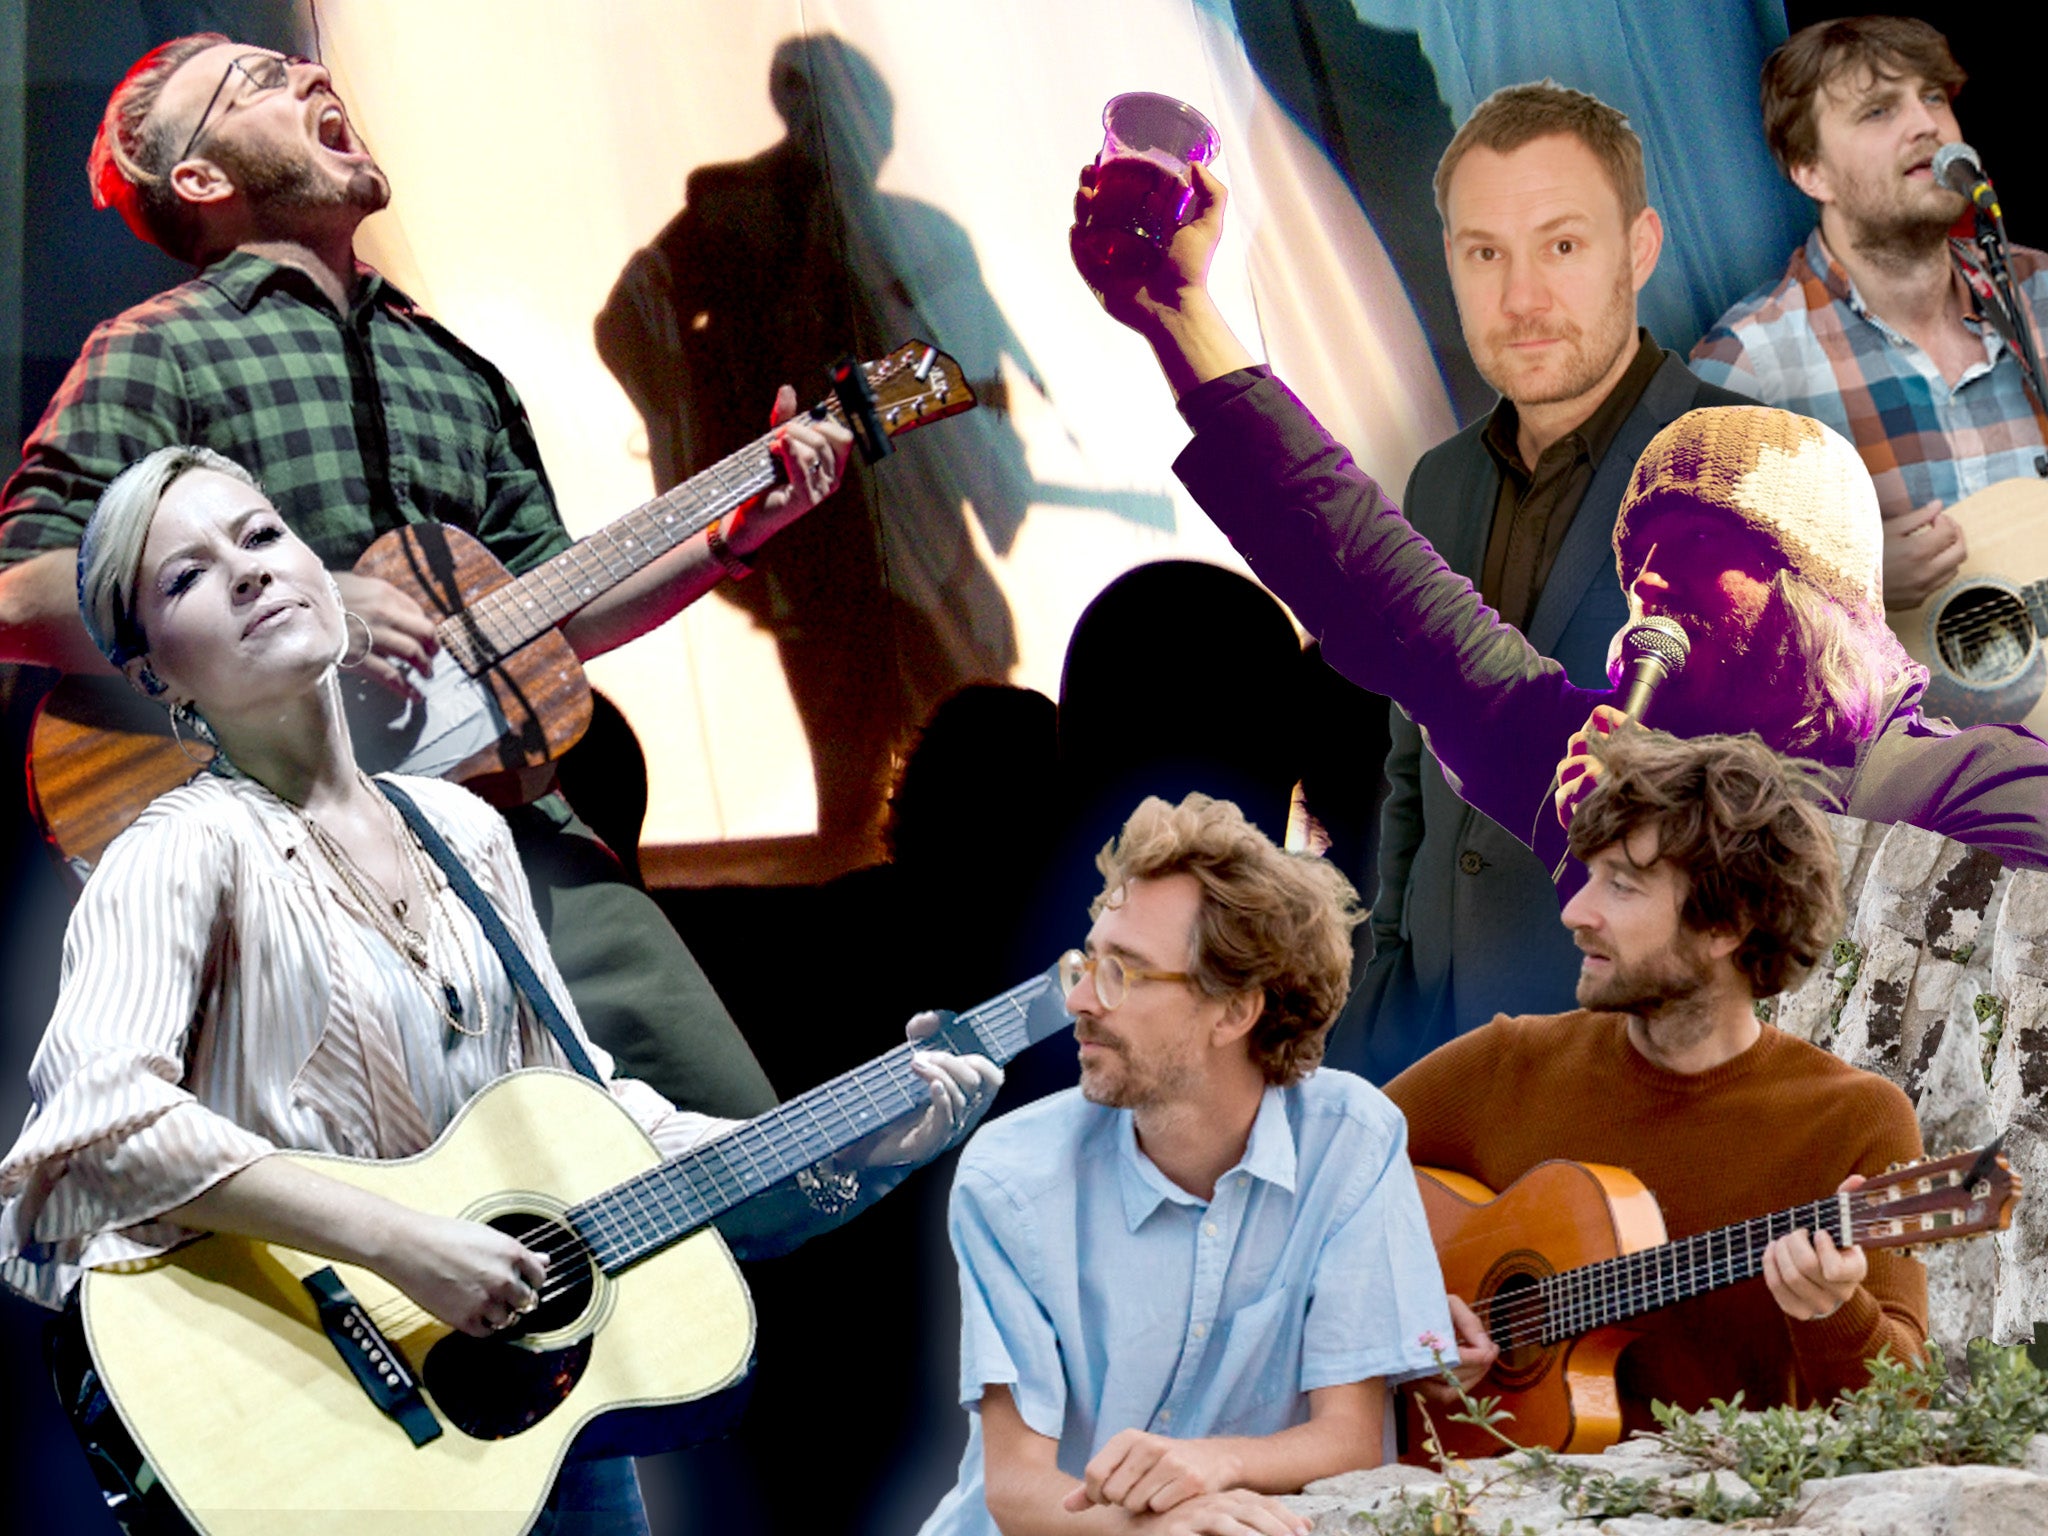 (clockwise from bottom left): Dido, Turin Brakes, David Gray, Starsailor, Badly Drawn Boy, Kings of Convenience